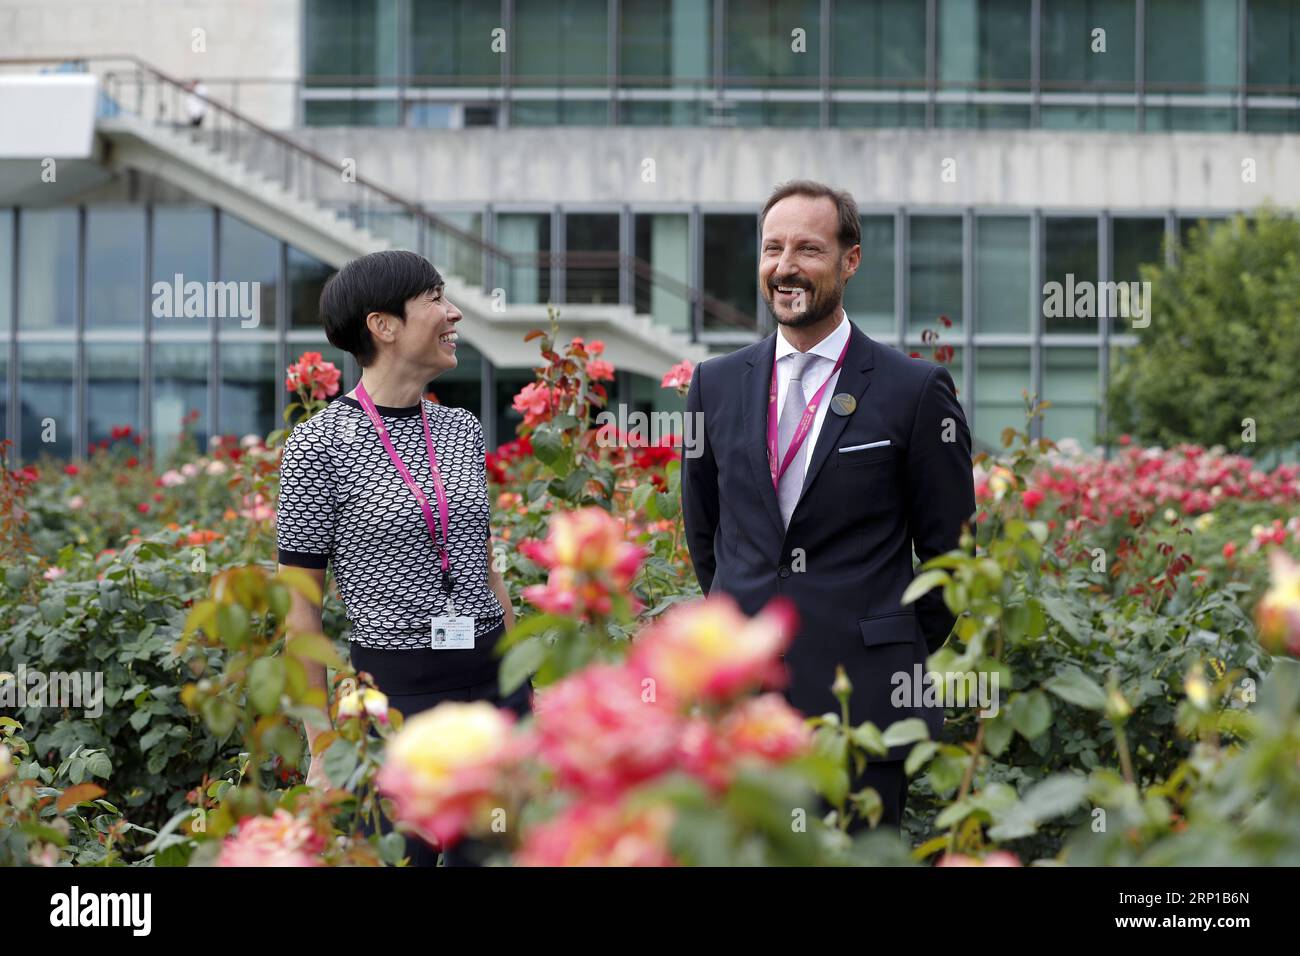 (180622) -- UNITED NATIONS, June 22, 2018 -- Norway s Crown Prince Haakon (R) and Foreign Minister Ine Eriksen Soreide attend a press event about the launch of Norway s campaign for an elected seat in the UN Security Council for the 2021-2022 term at the United Nations headquarters in New York, on June 22, 2018. ) UN-SECURITY COUNCIL-NORWAY-SEAT-CAMPAIGN LixMuzi PUBLICATIONxNOTxINxCHN Stock Photo